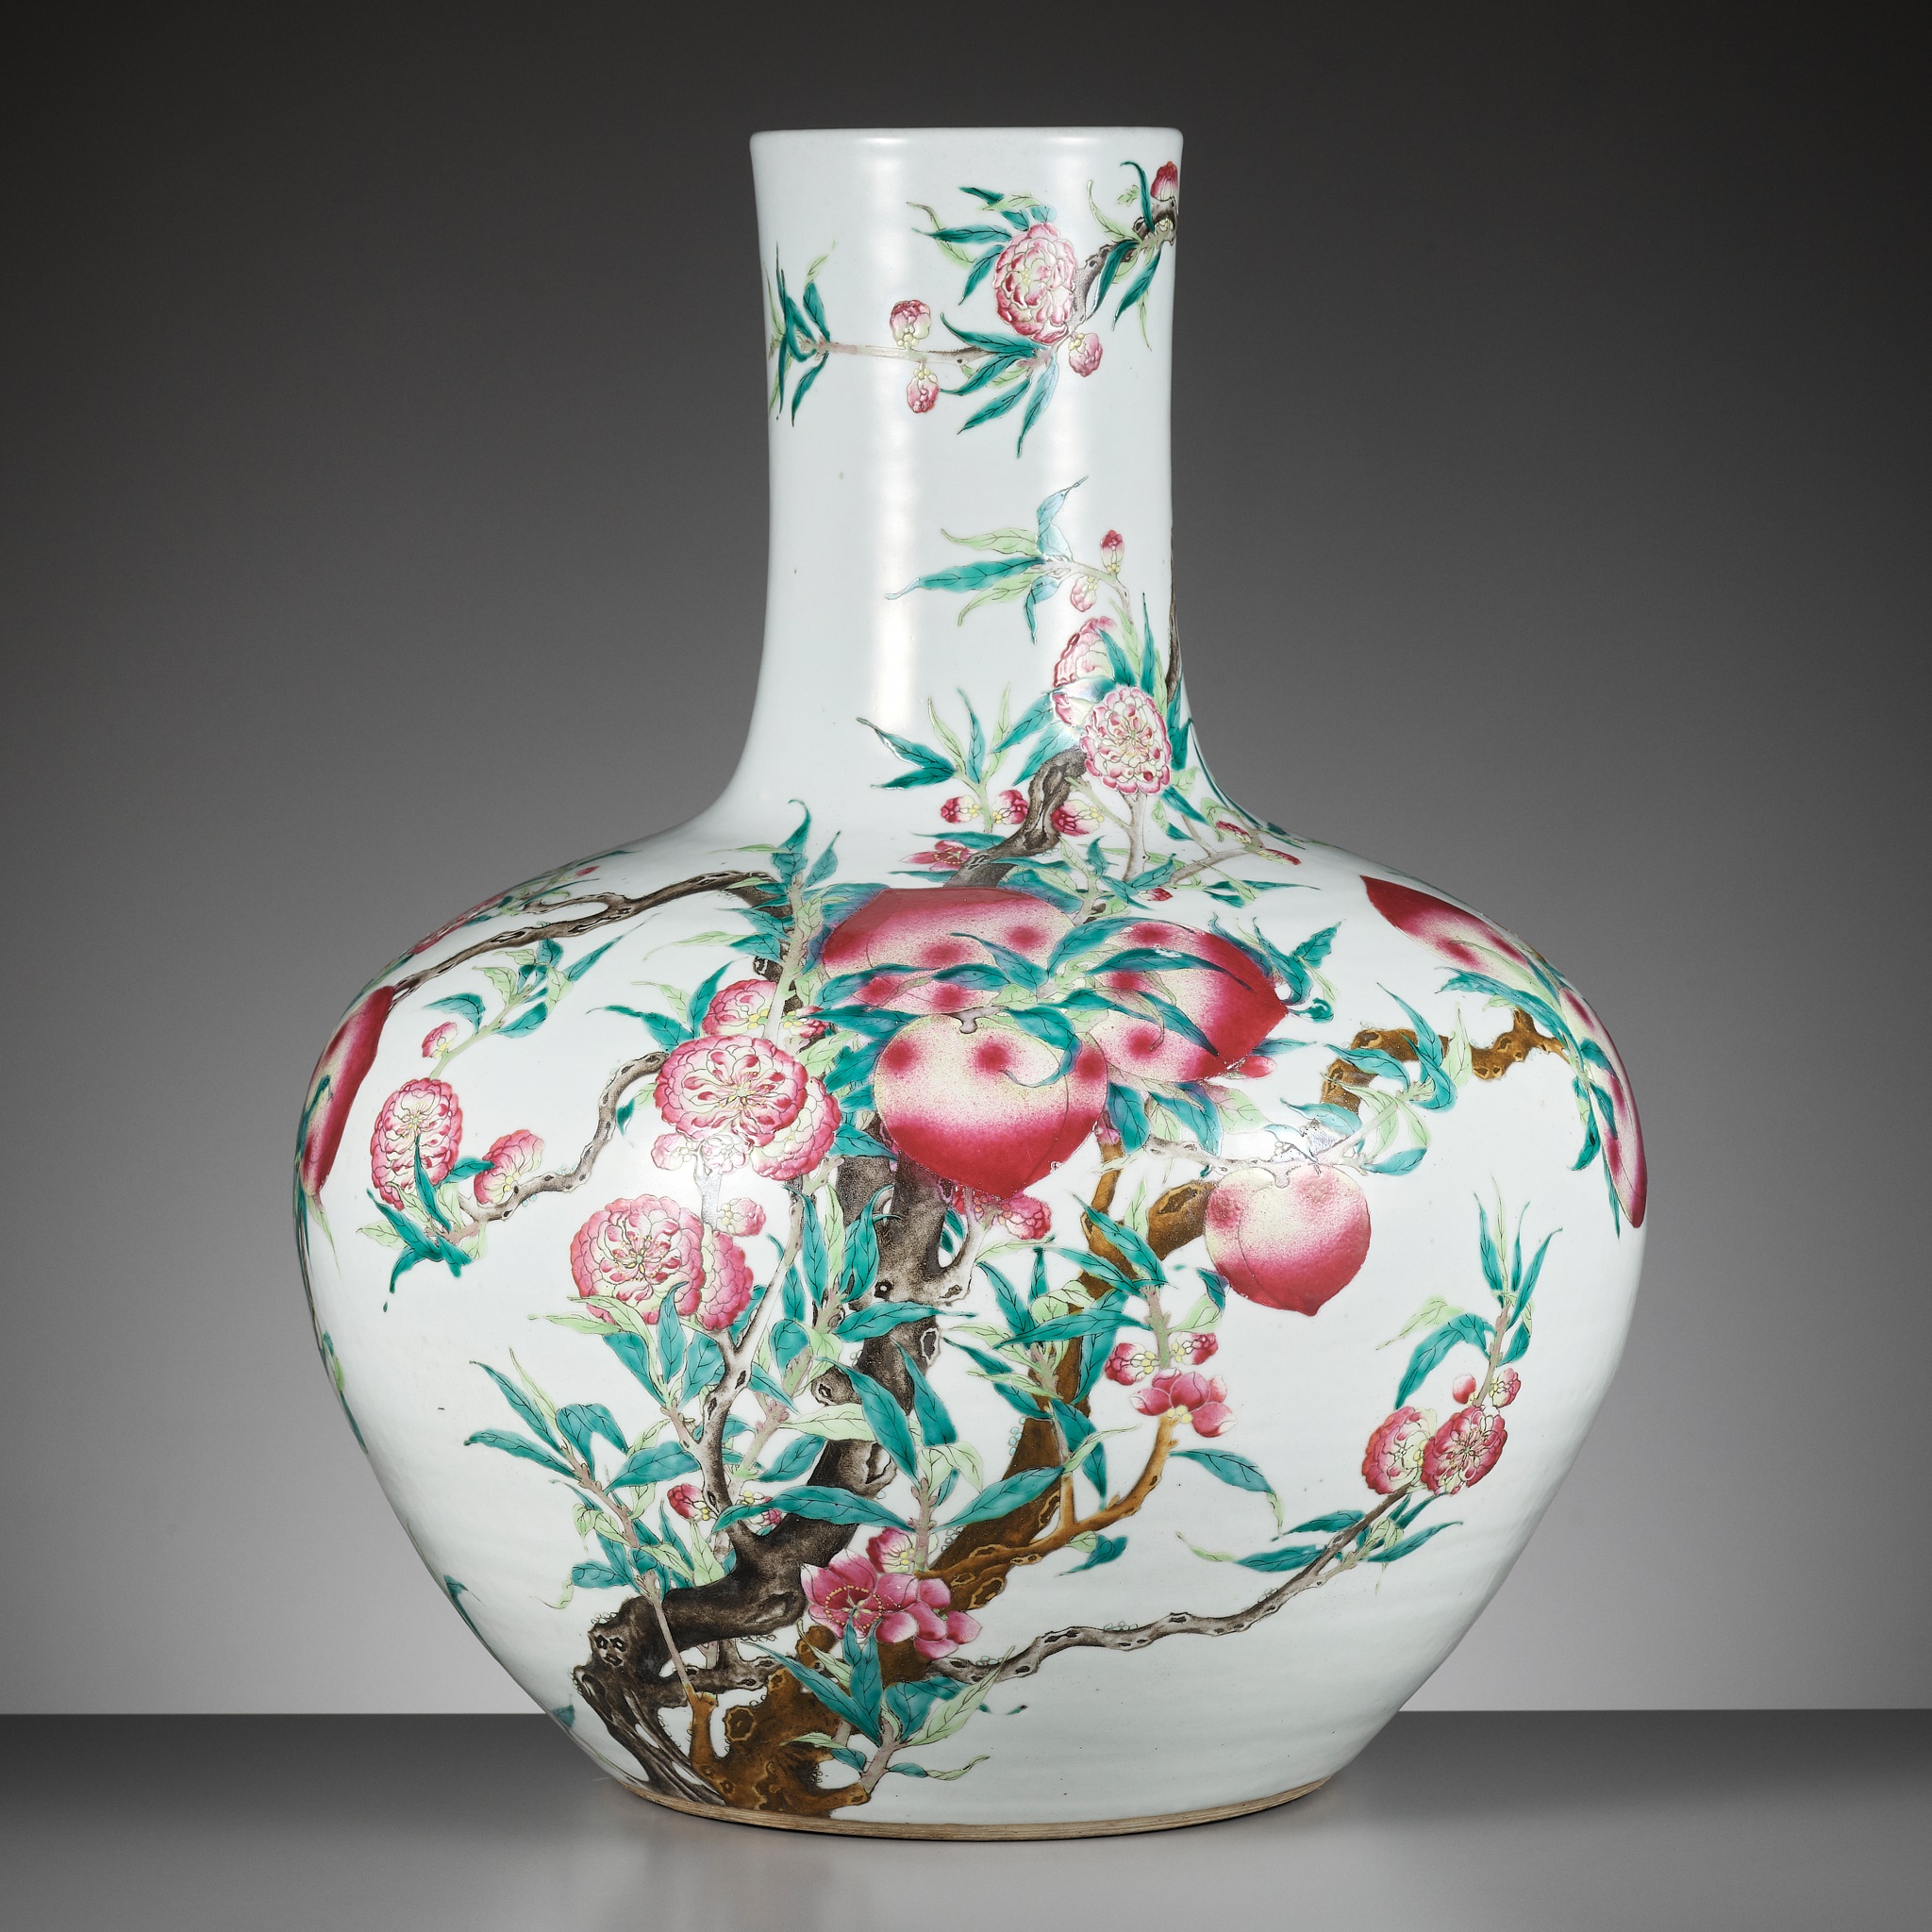 A FAMILLE ROSE 'NINE PEACHES' VASE, TIANQIUPING, LATE QING DYNASTY TO REPUBLIC PERIOD